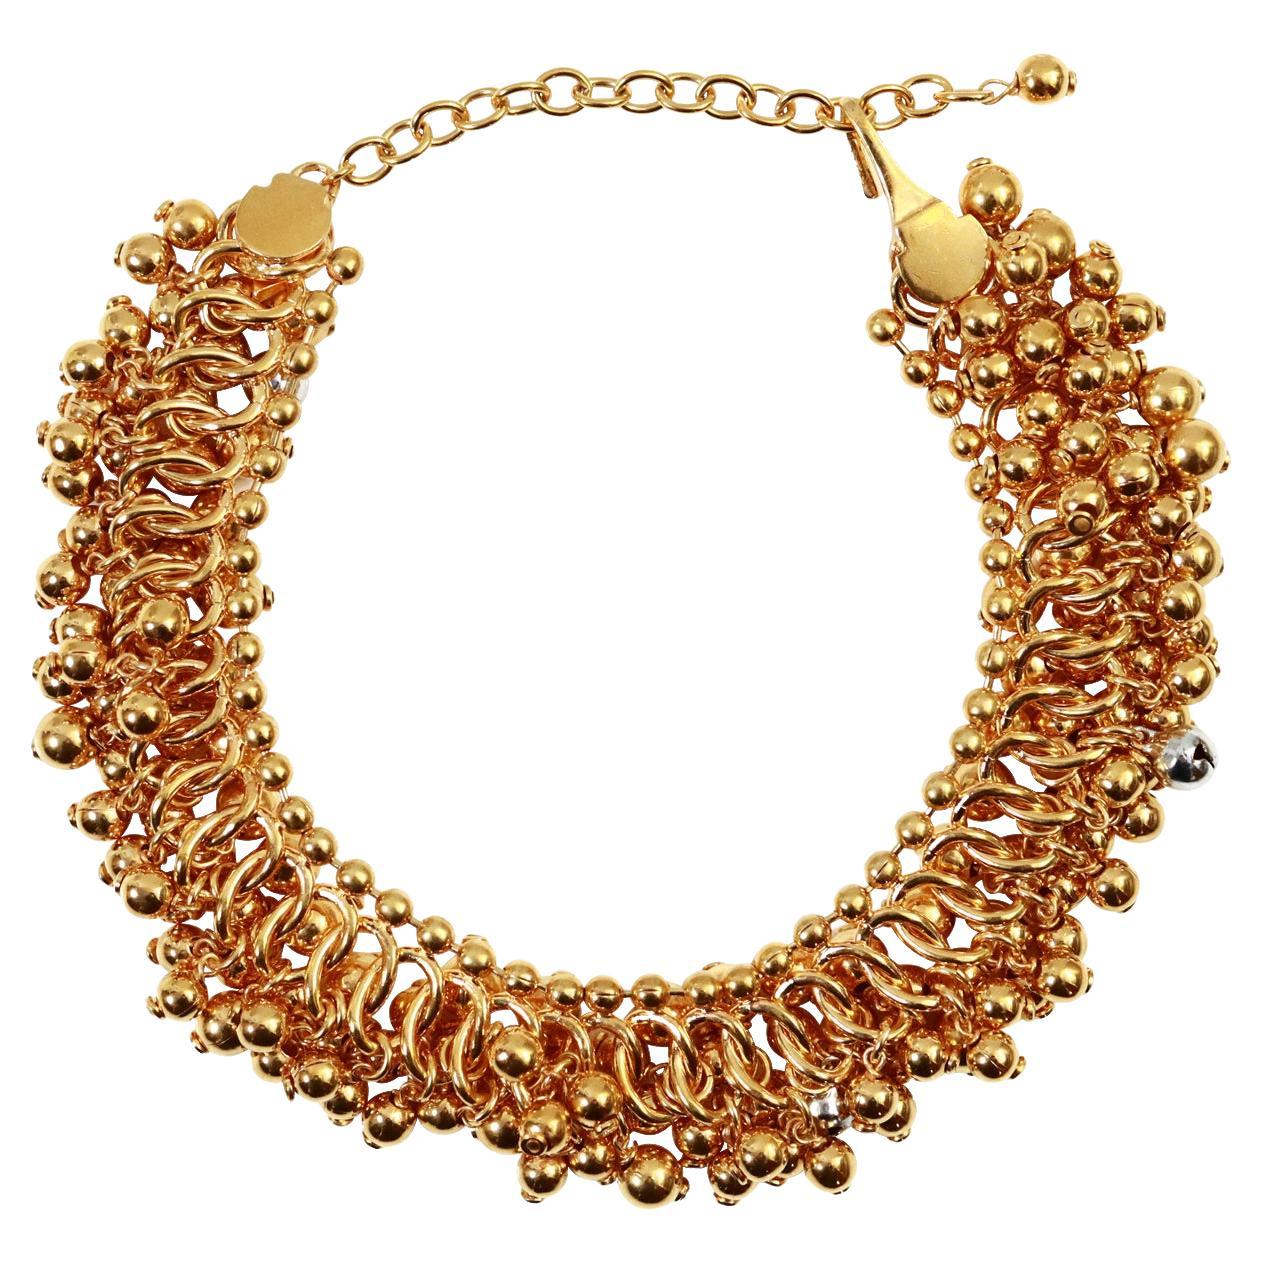 Vintage Dior Gold Choker Necklace with Dangling Balls Circa 2000 In Good Condition For Sale In New York, NY